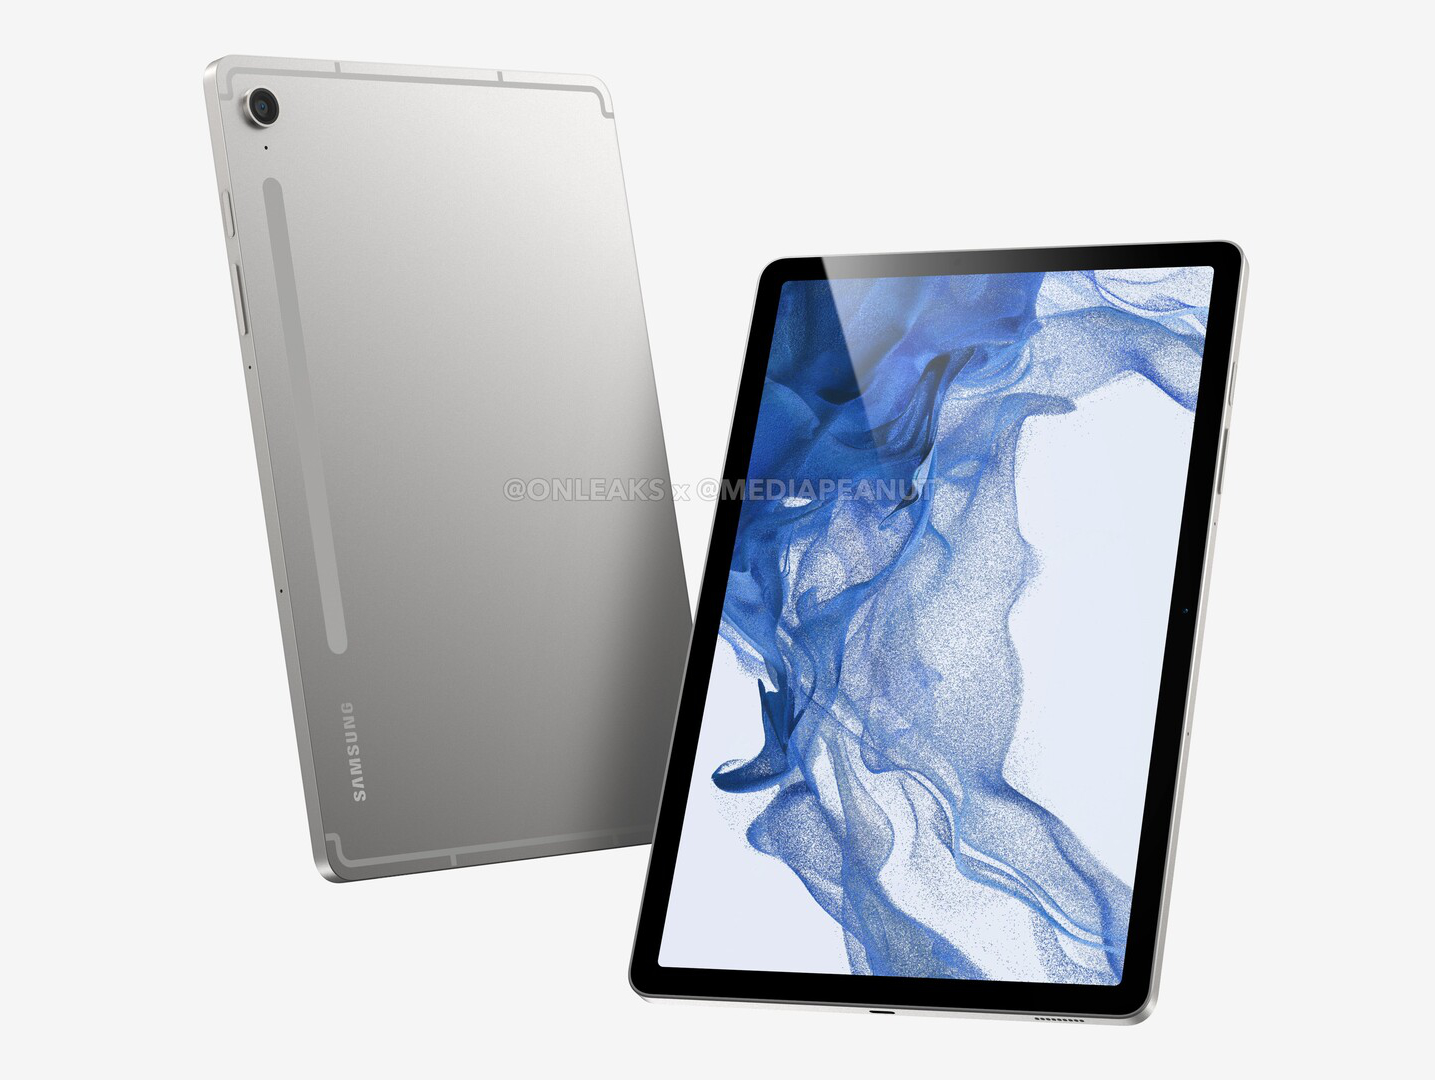 Samsung Galaxy Tab S9 FE surfaces with Wi-Fi and 5G variants